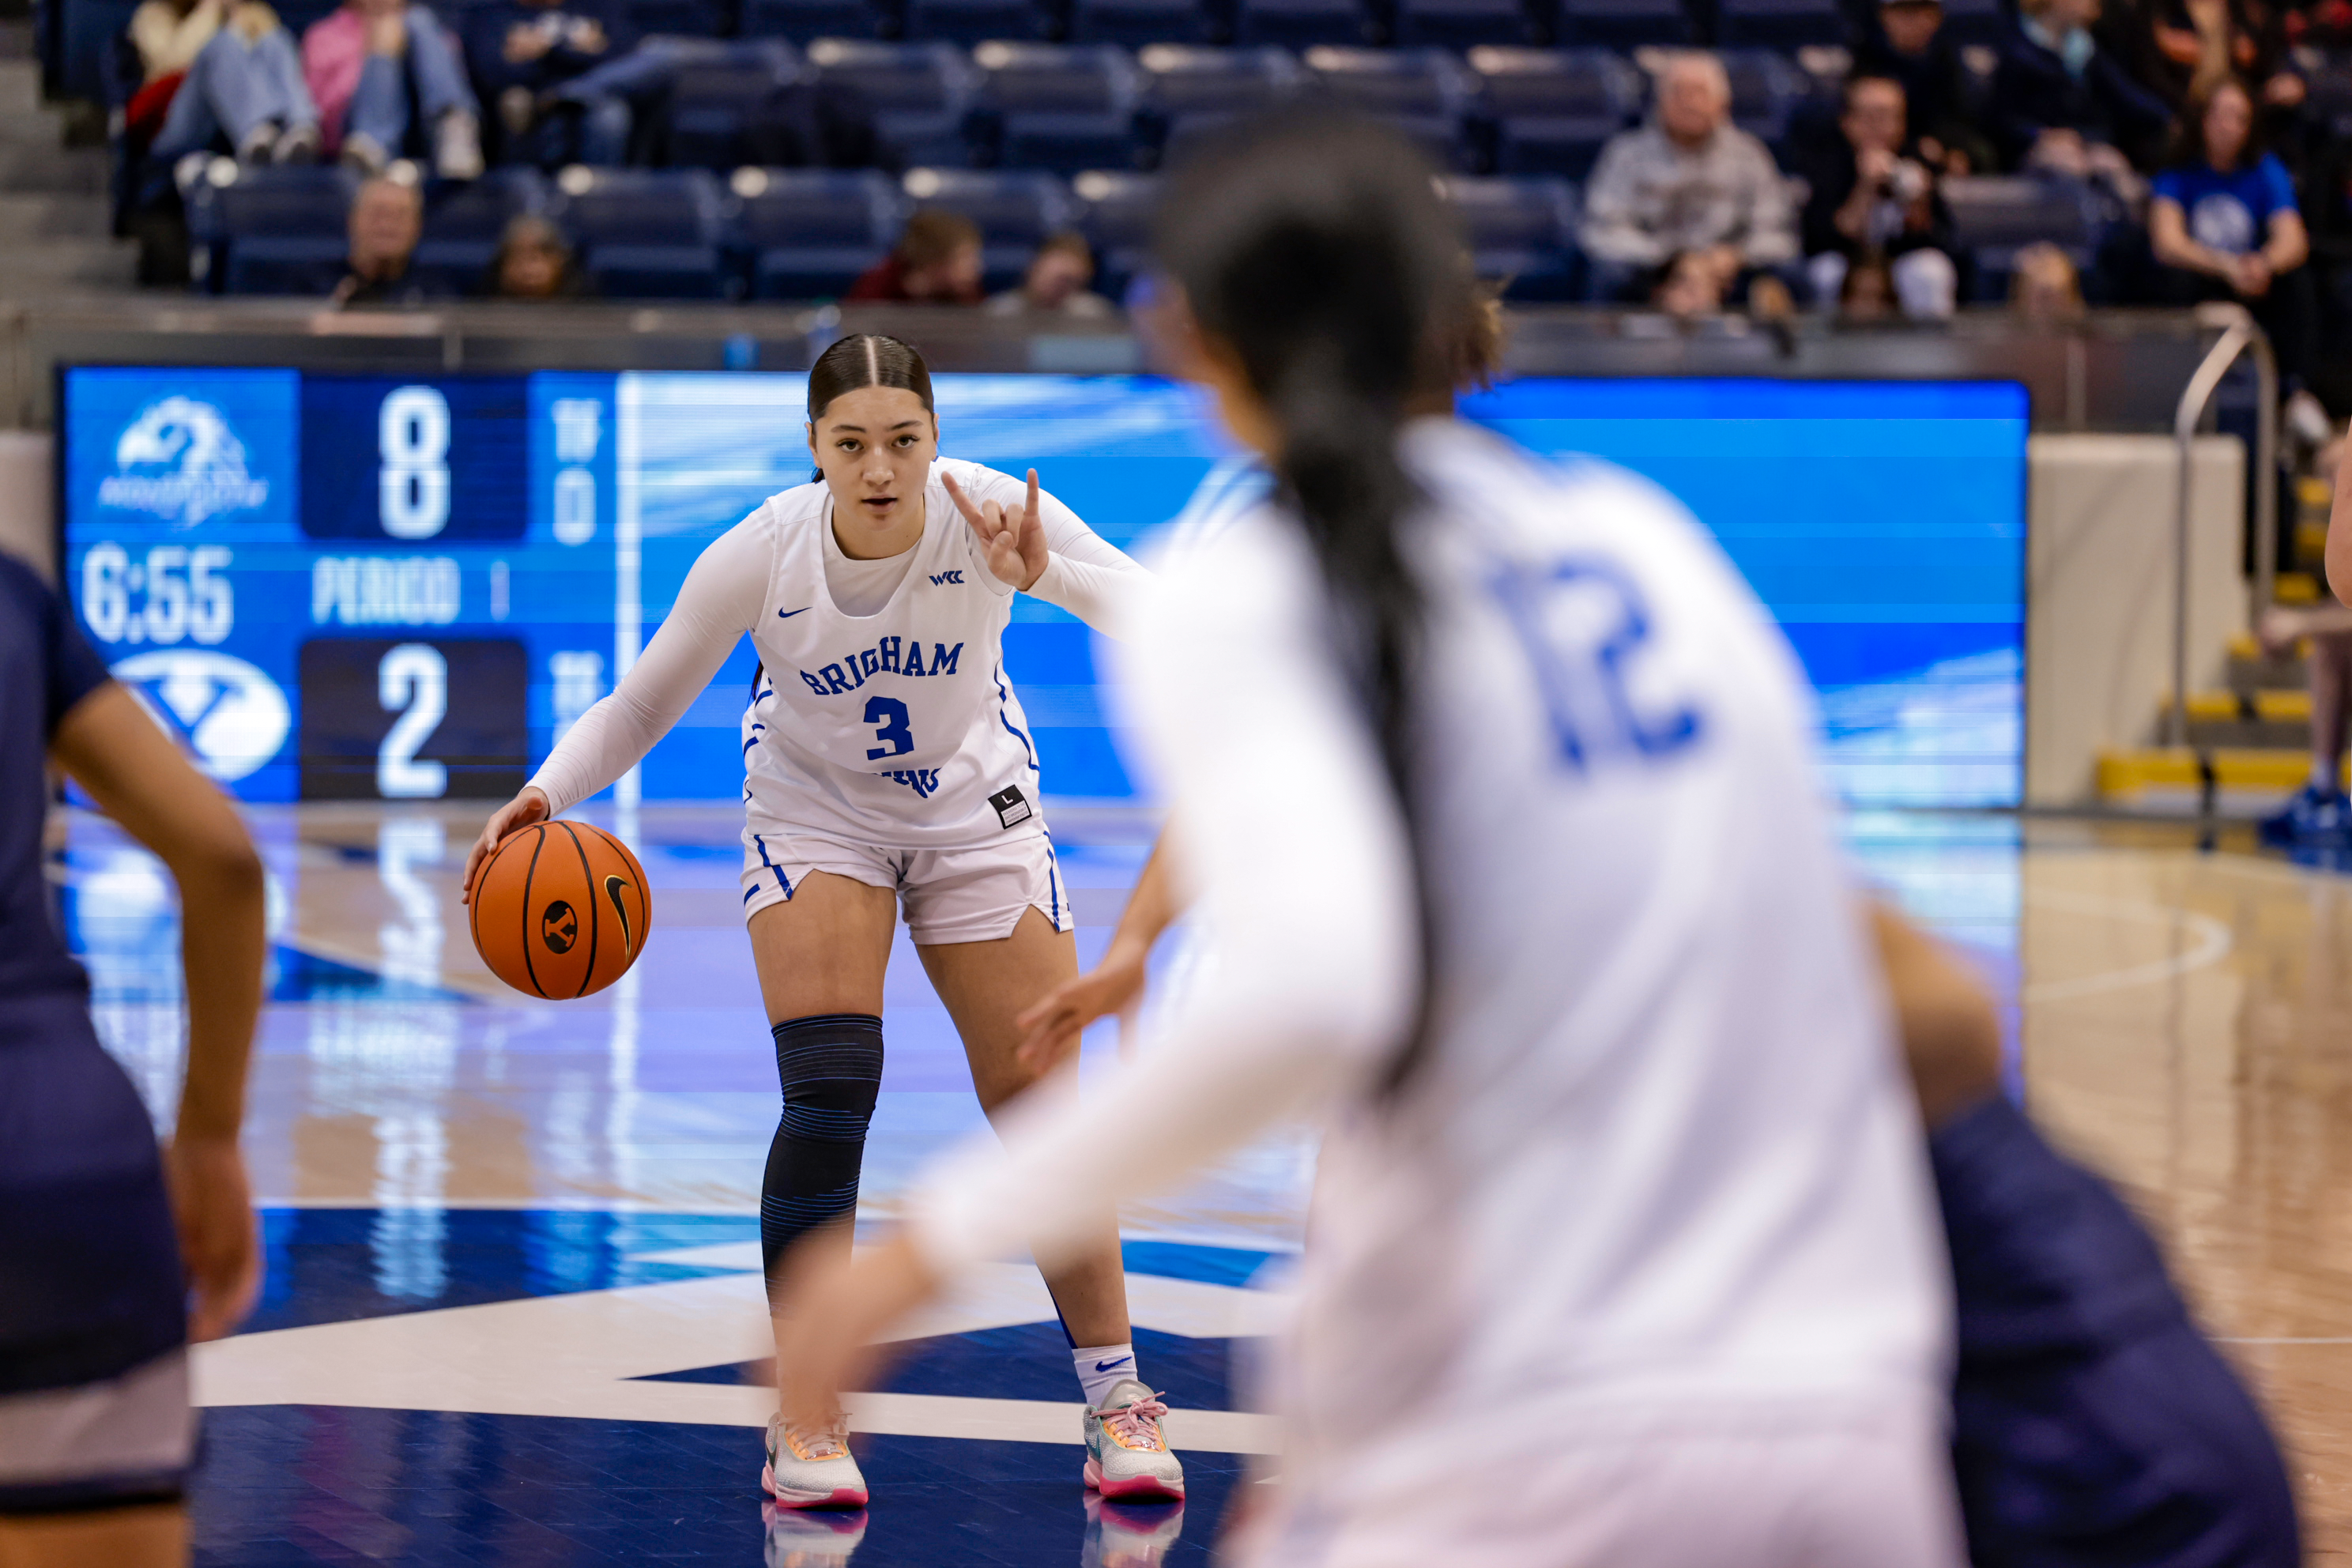 Nani Falatea orchestrates the offense during a 70-50 win over Monmouth at the Marriott Center.